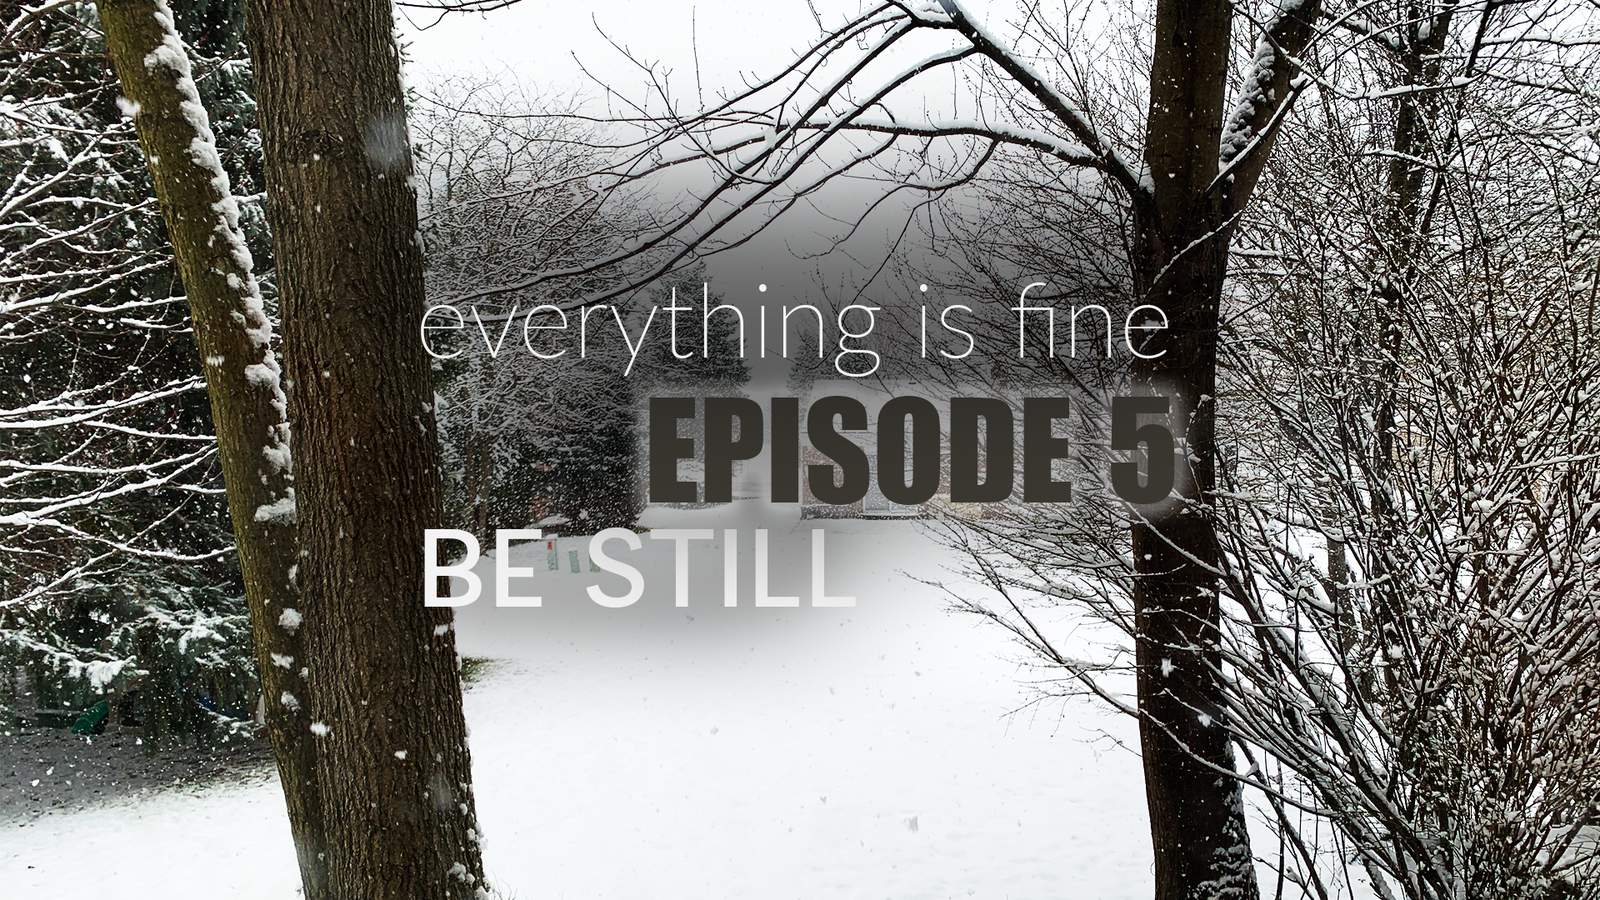 ‘Everything is Fine’ podcast: The shutdown we’ve been waiting for